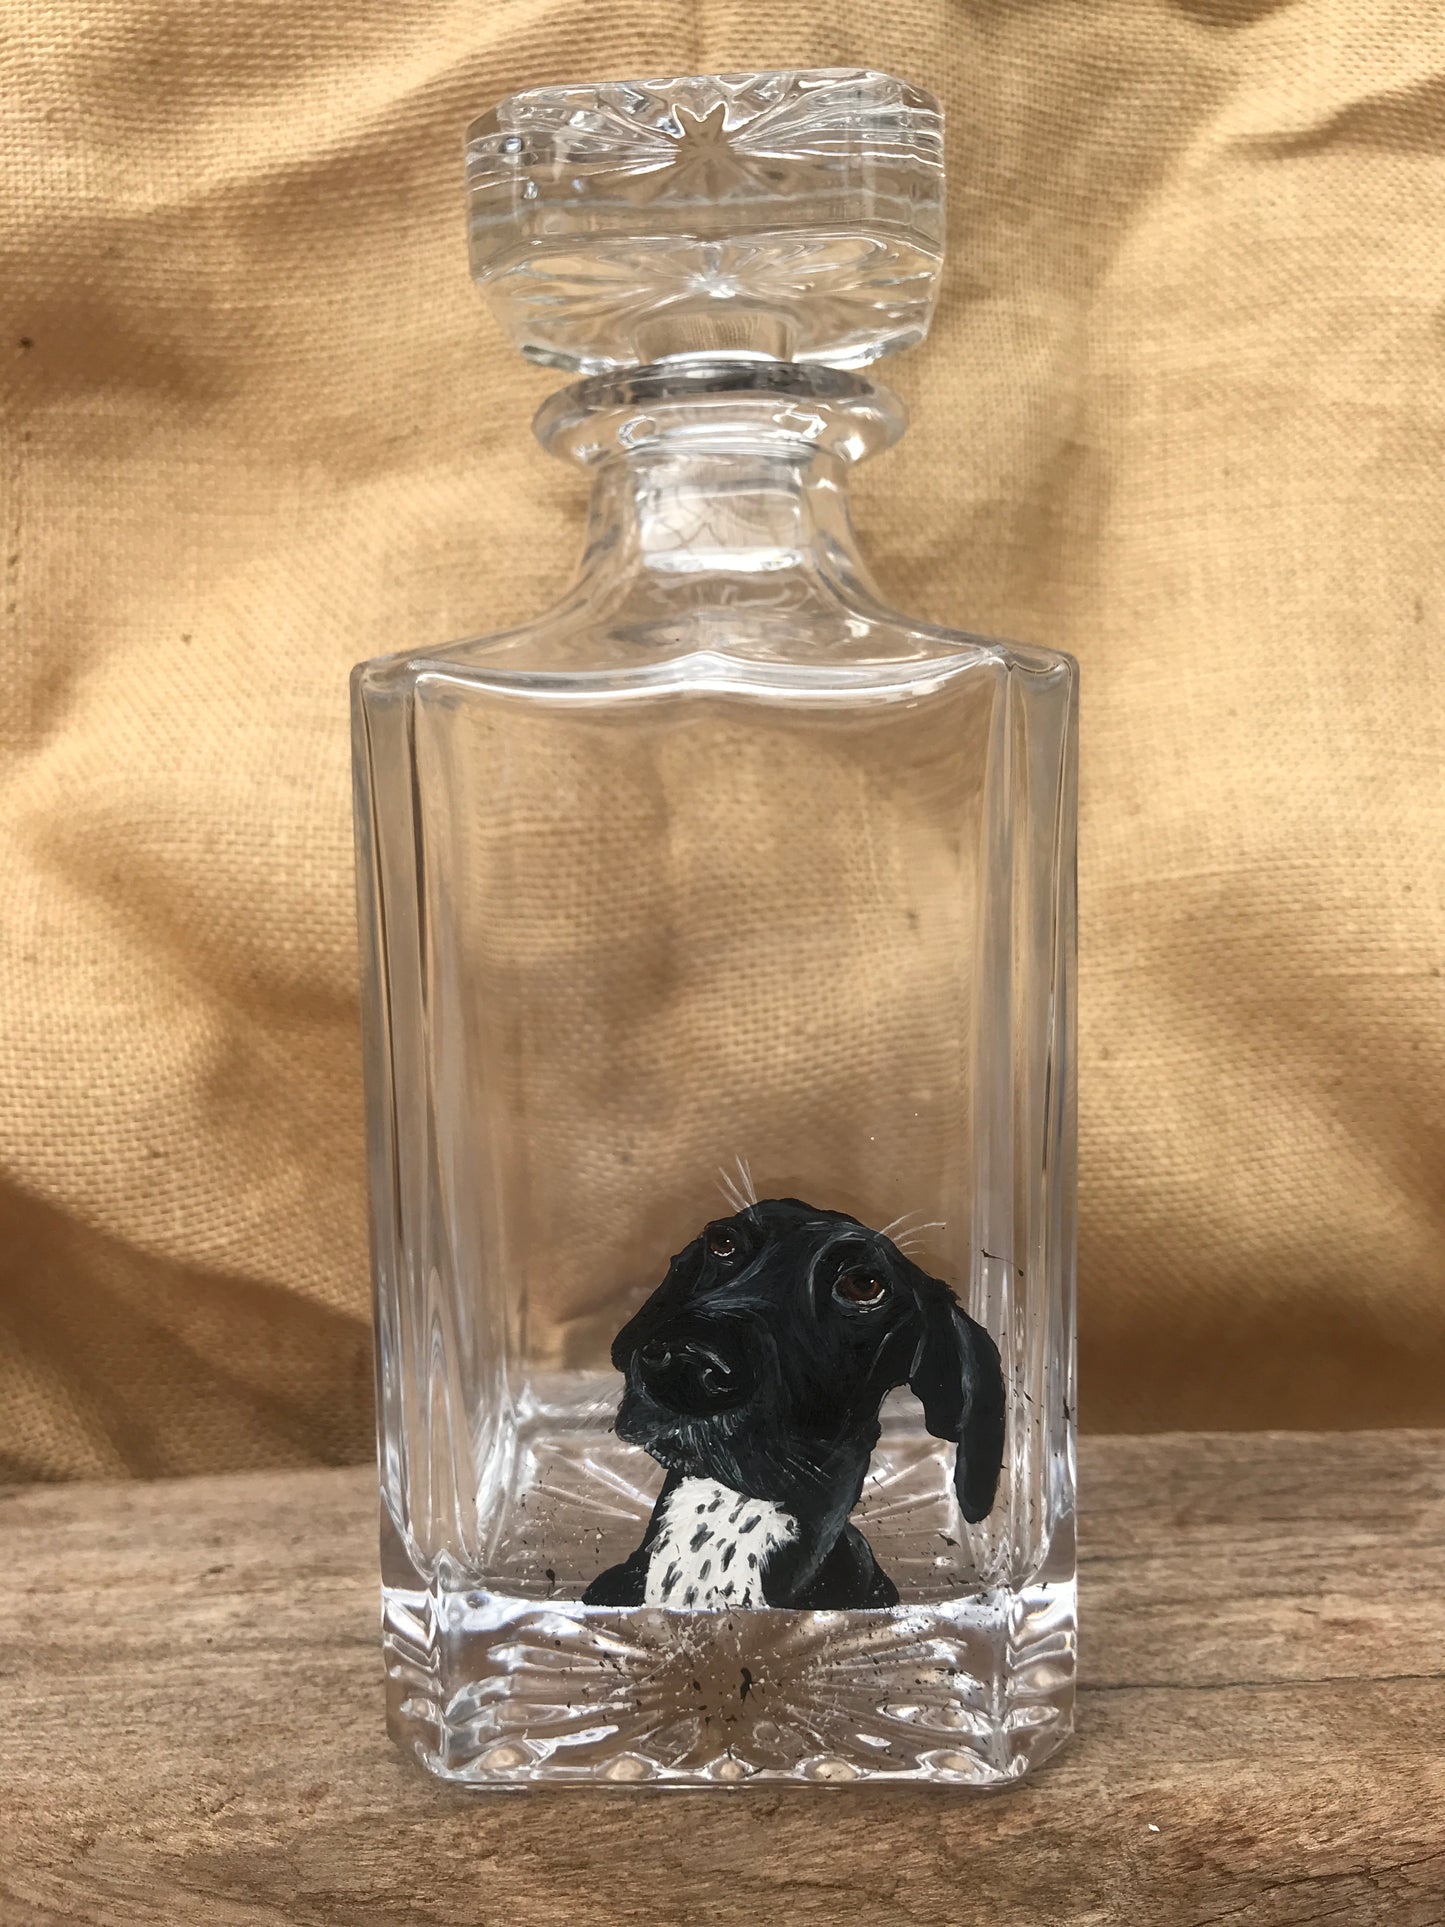 Pet PAWtraits Hand painted on Glassware